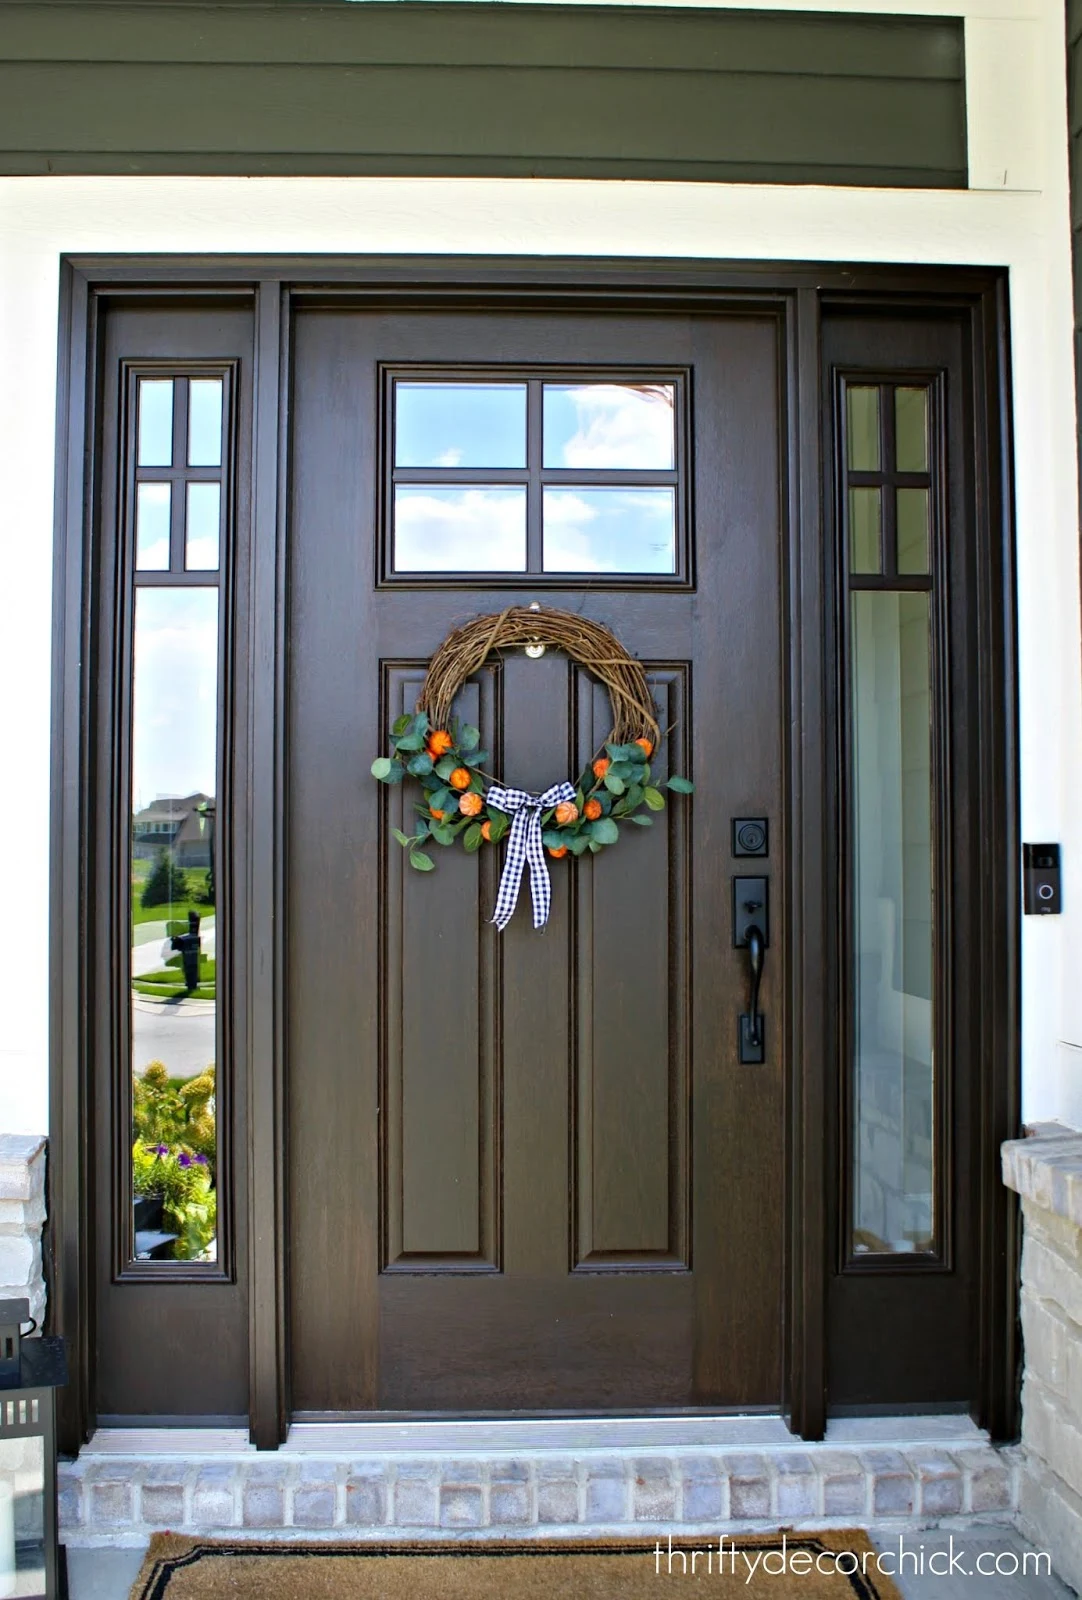 Craftsman stained door with windows and sidelights